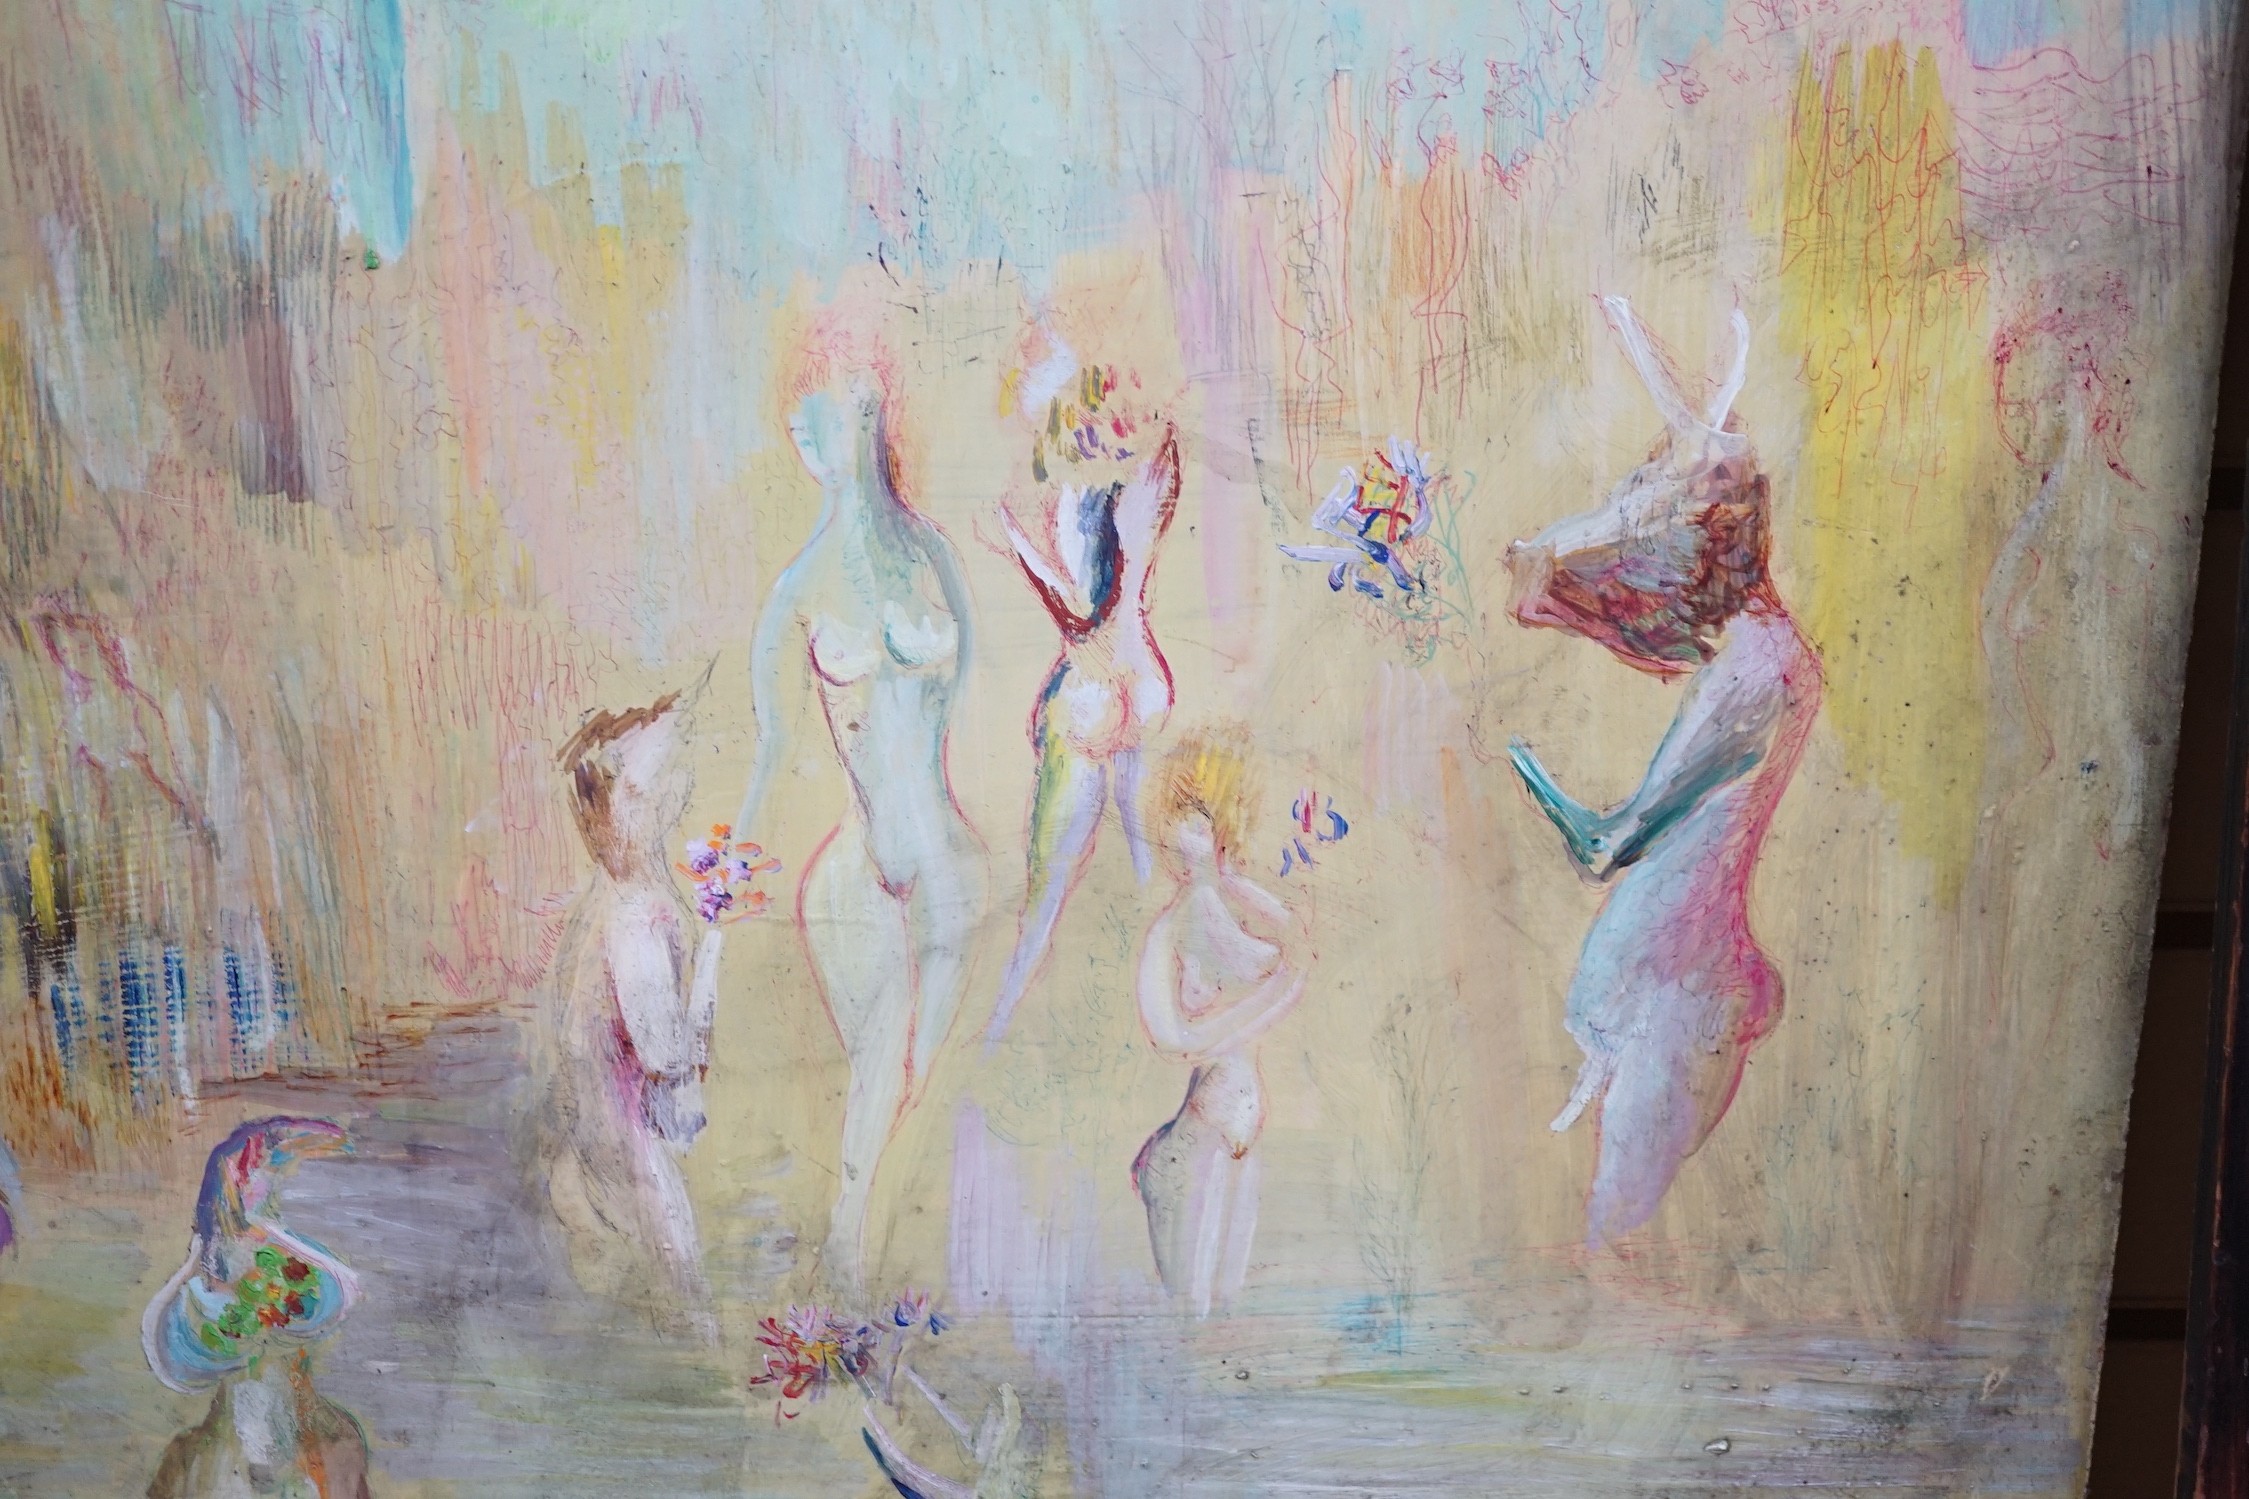 Pinder, three oils, 'Nudes bathing', 'Park scene' and 'Fireworks at night', signed, largest 60 x 91cm (a.f.)